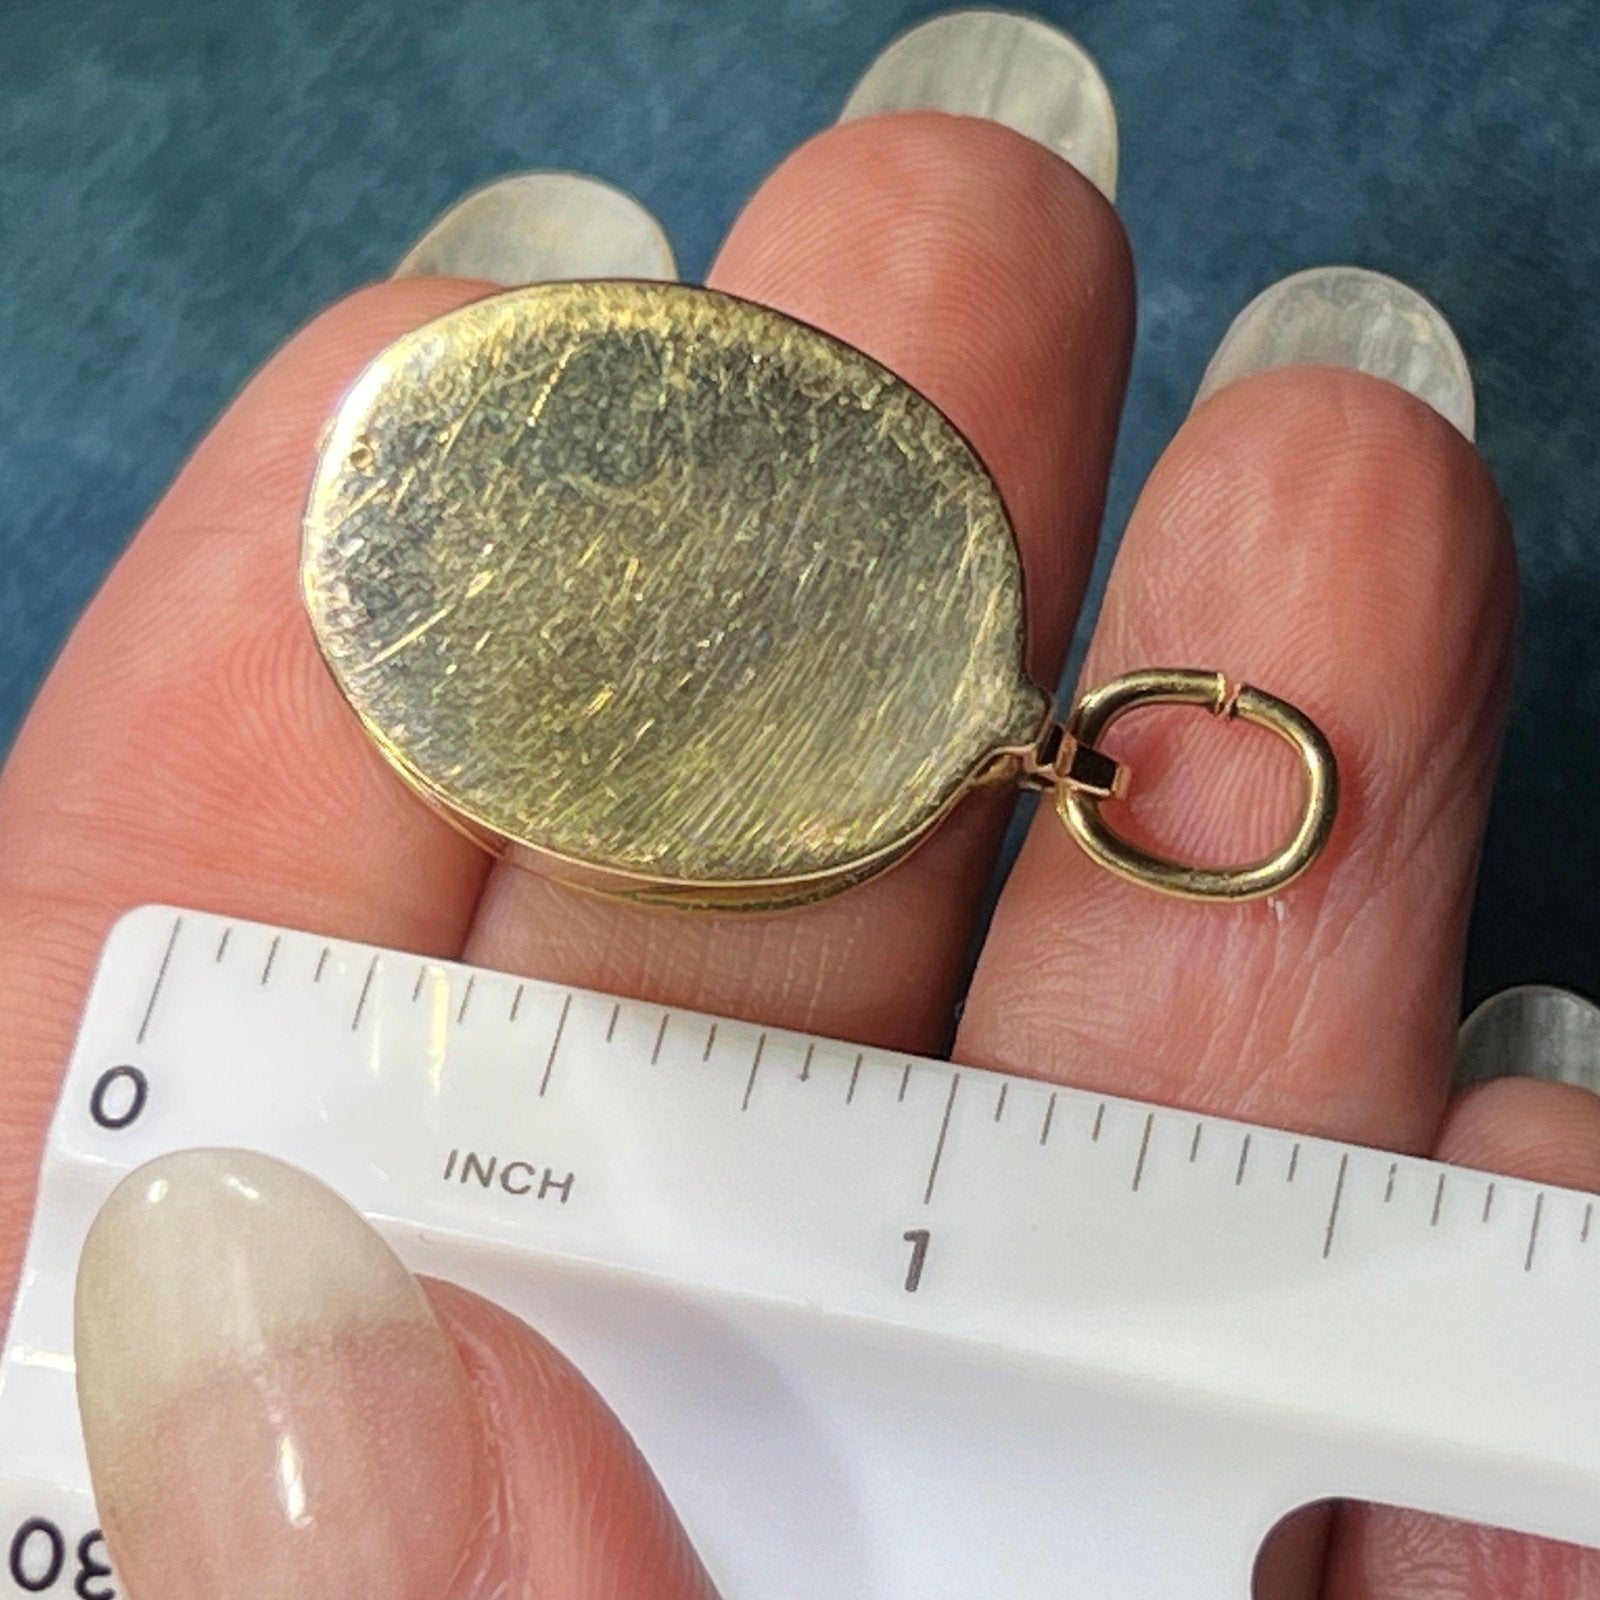 10k Yellow Gold Magnifying Glass JEWELERS LOUPE Pendant. Antique